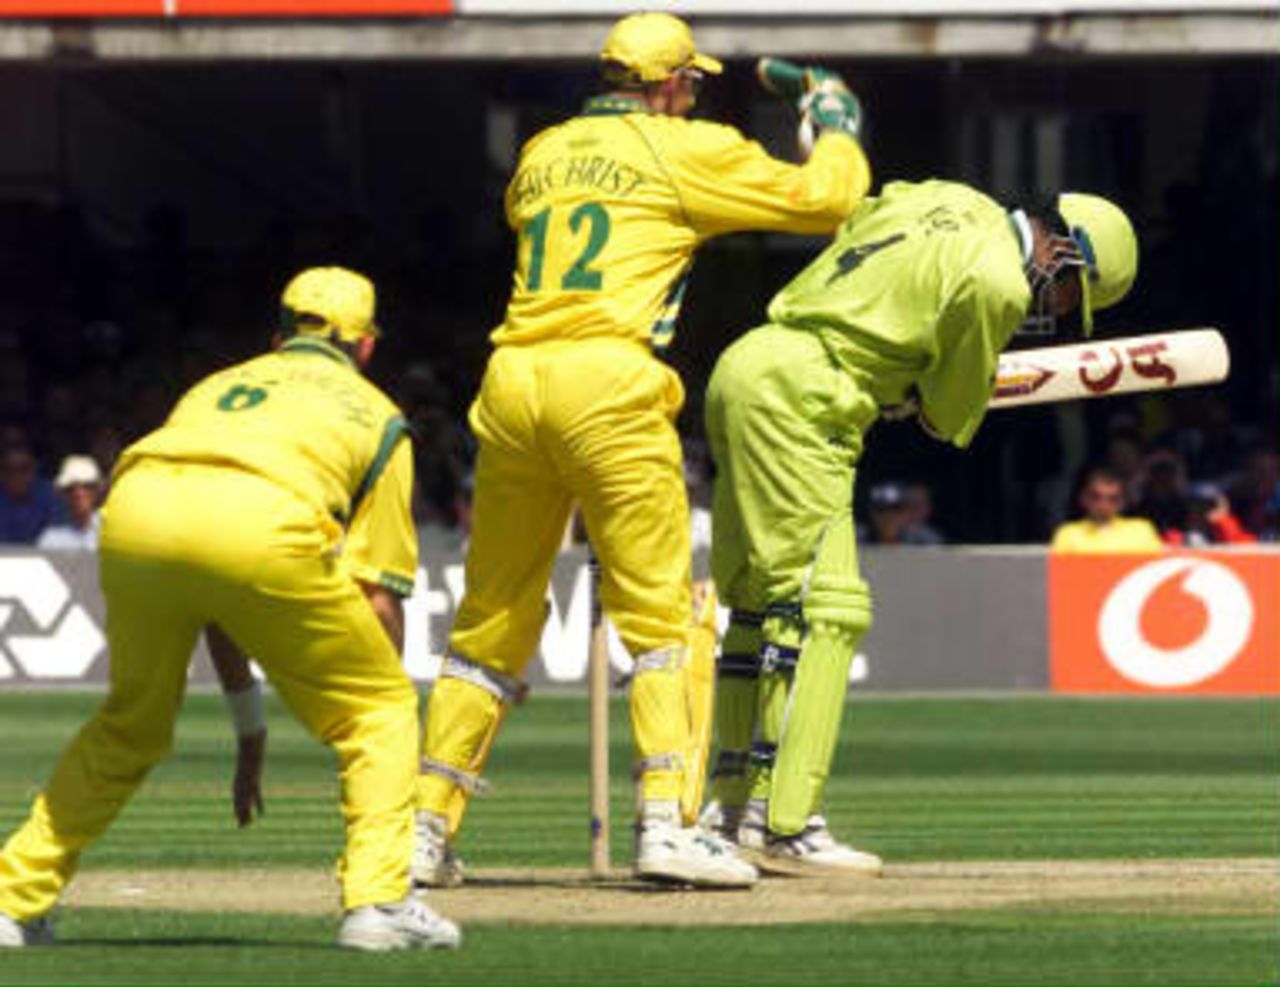 Pakistan's Ijaz Ahmed is out off the bowling of Australia's Shane Warne 20 June 1999 during the Cricket World Cup final at Lord's, London